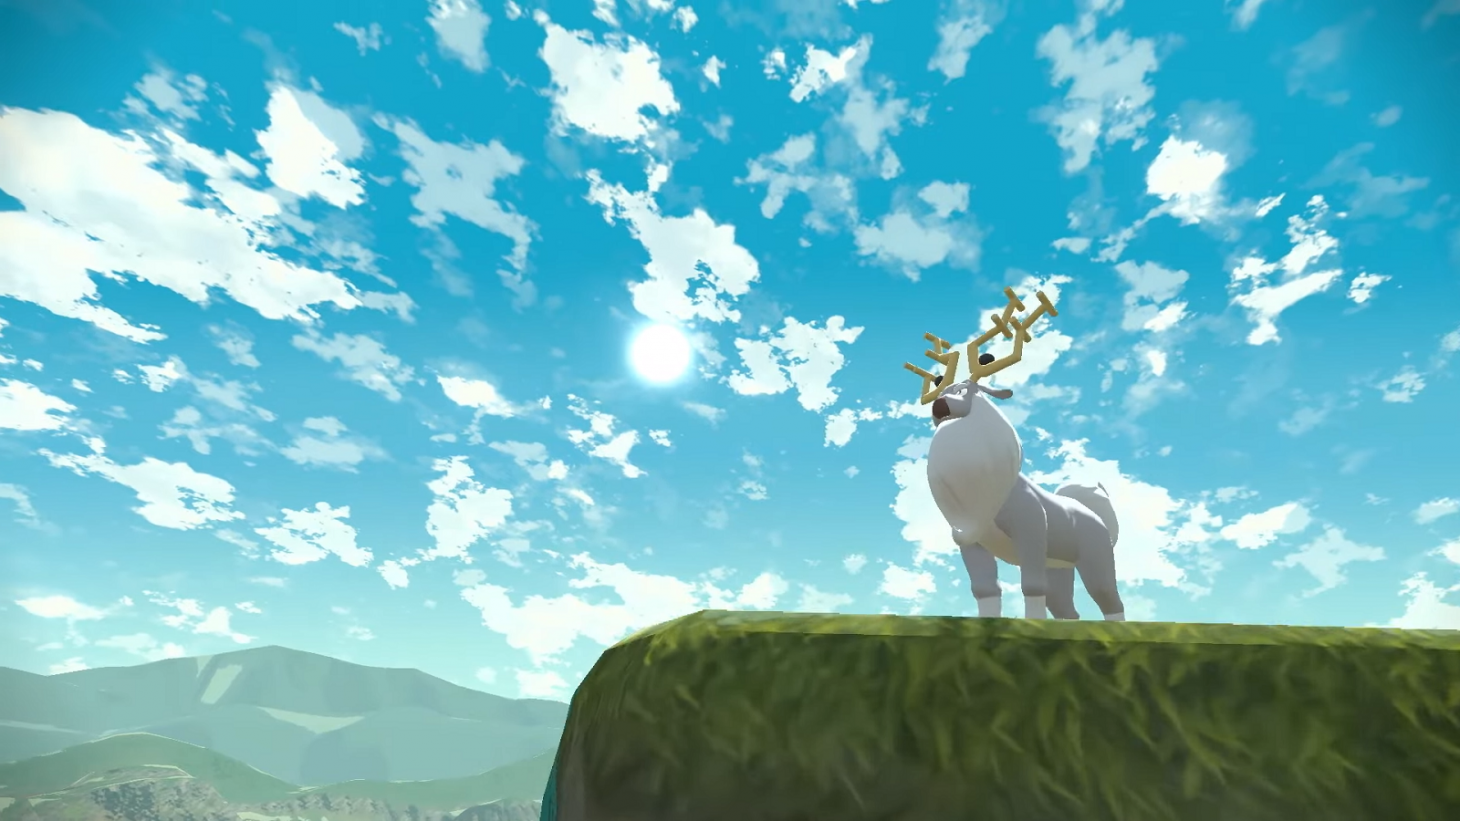 Pokemon Legends: Arceus extended trailer shows off missions, crafting and  more - CNET